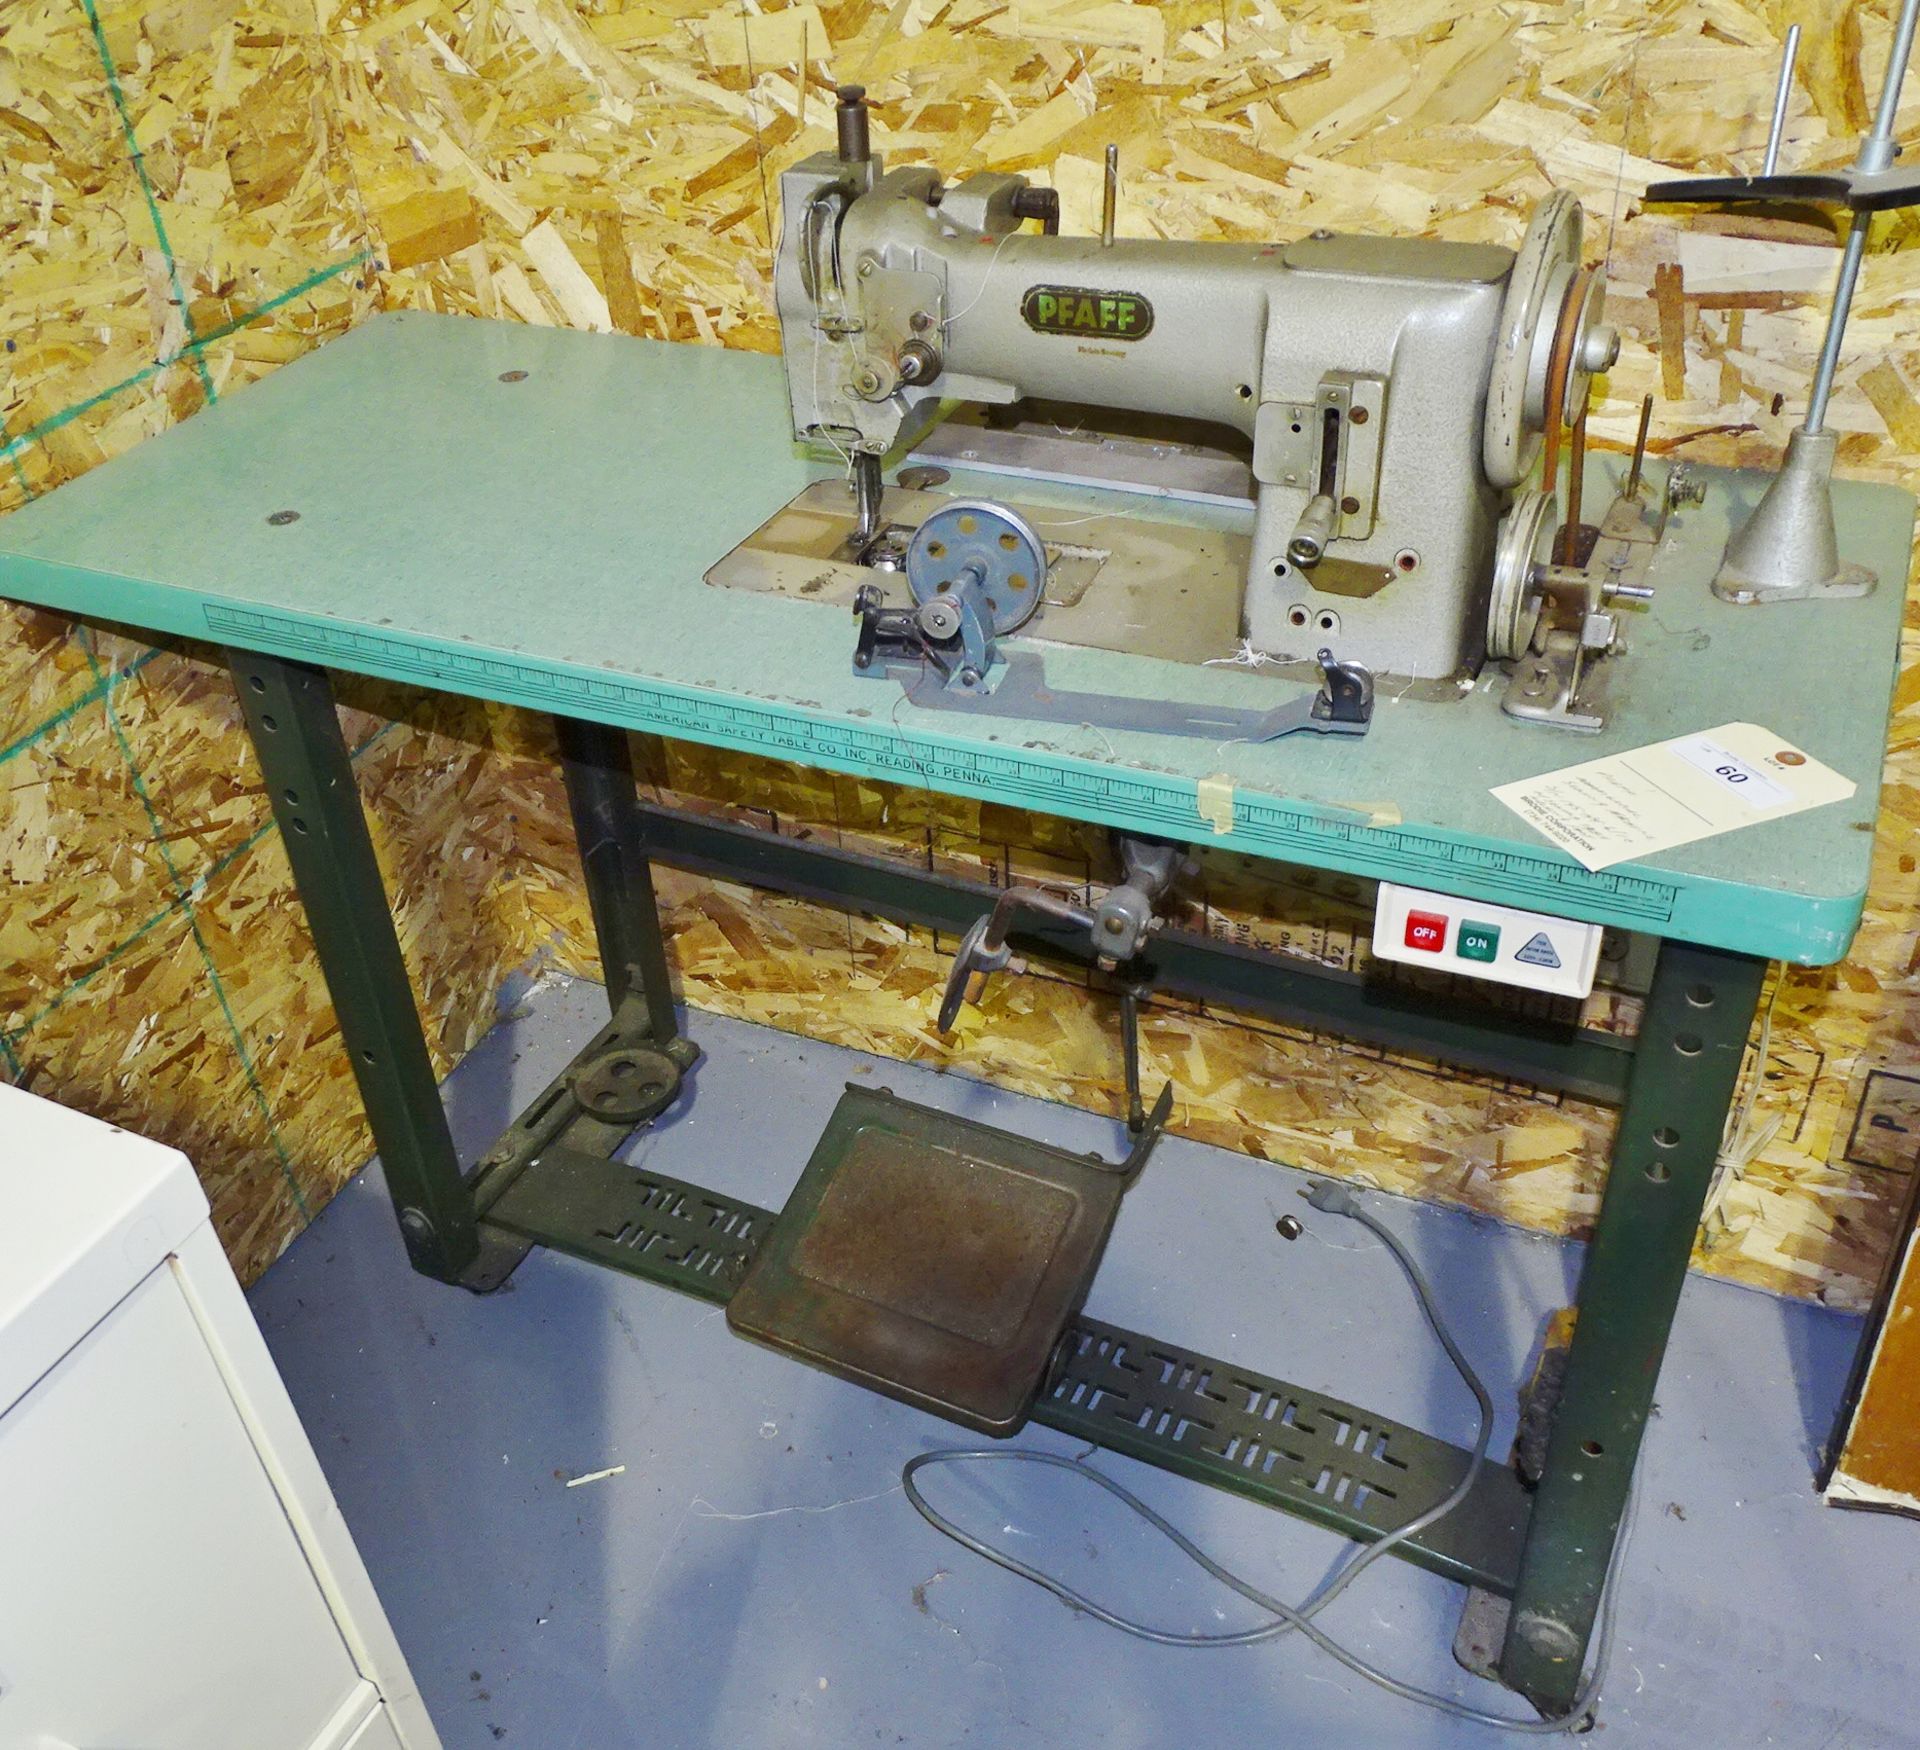 PFAFF Commercial Sewing Machine w/ Table & Foot - Image 2 of 2